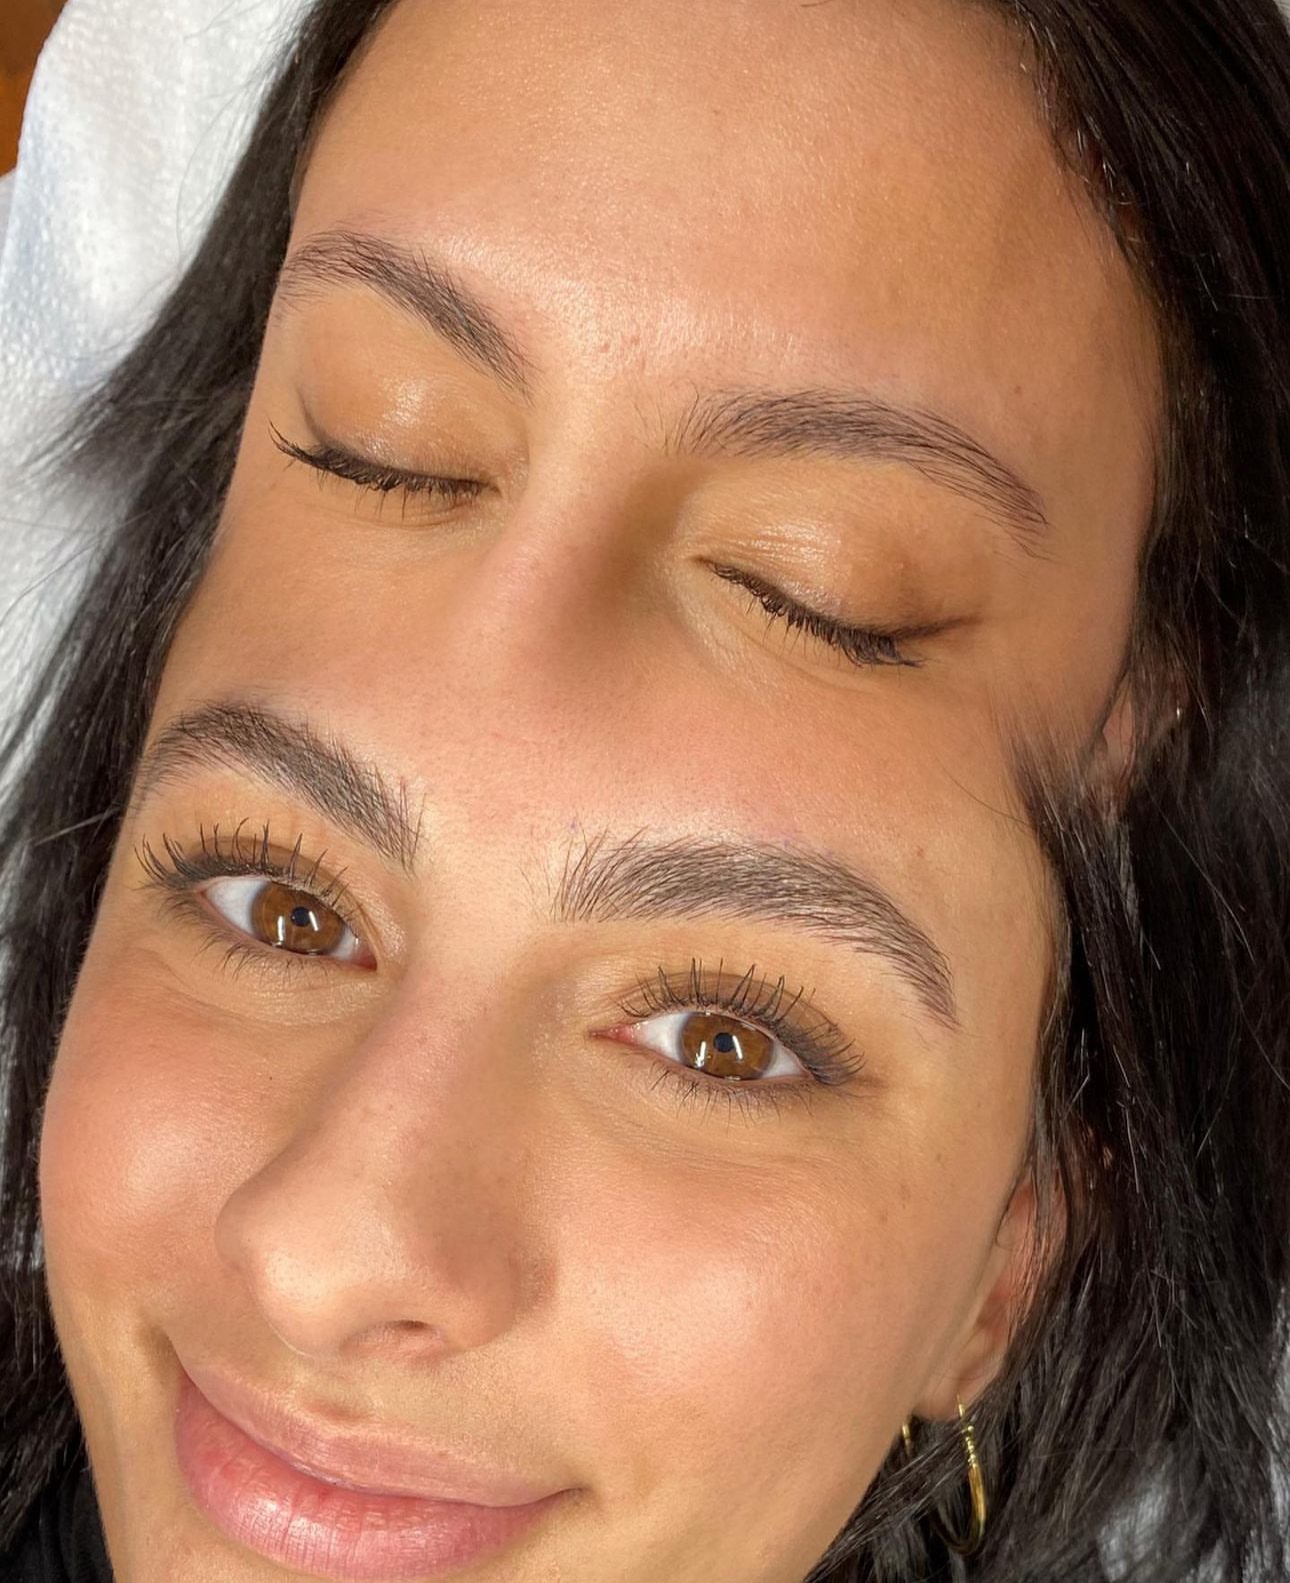 Microblading: the ultimate magic wand for those Insta-worthy, fluffy brows we all dream about!  Say goodbye to brow envy and hello to your own personal brow fairy tale. Get ready to rock those gorgeously fluffy brows that are pure #BrowGoals, because